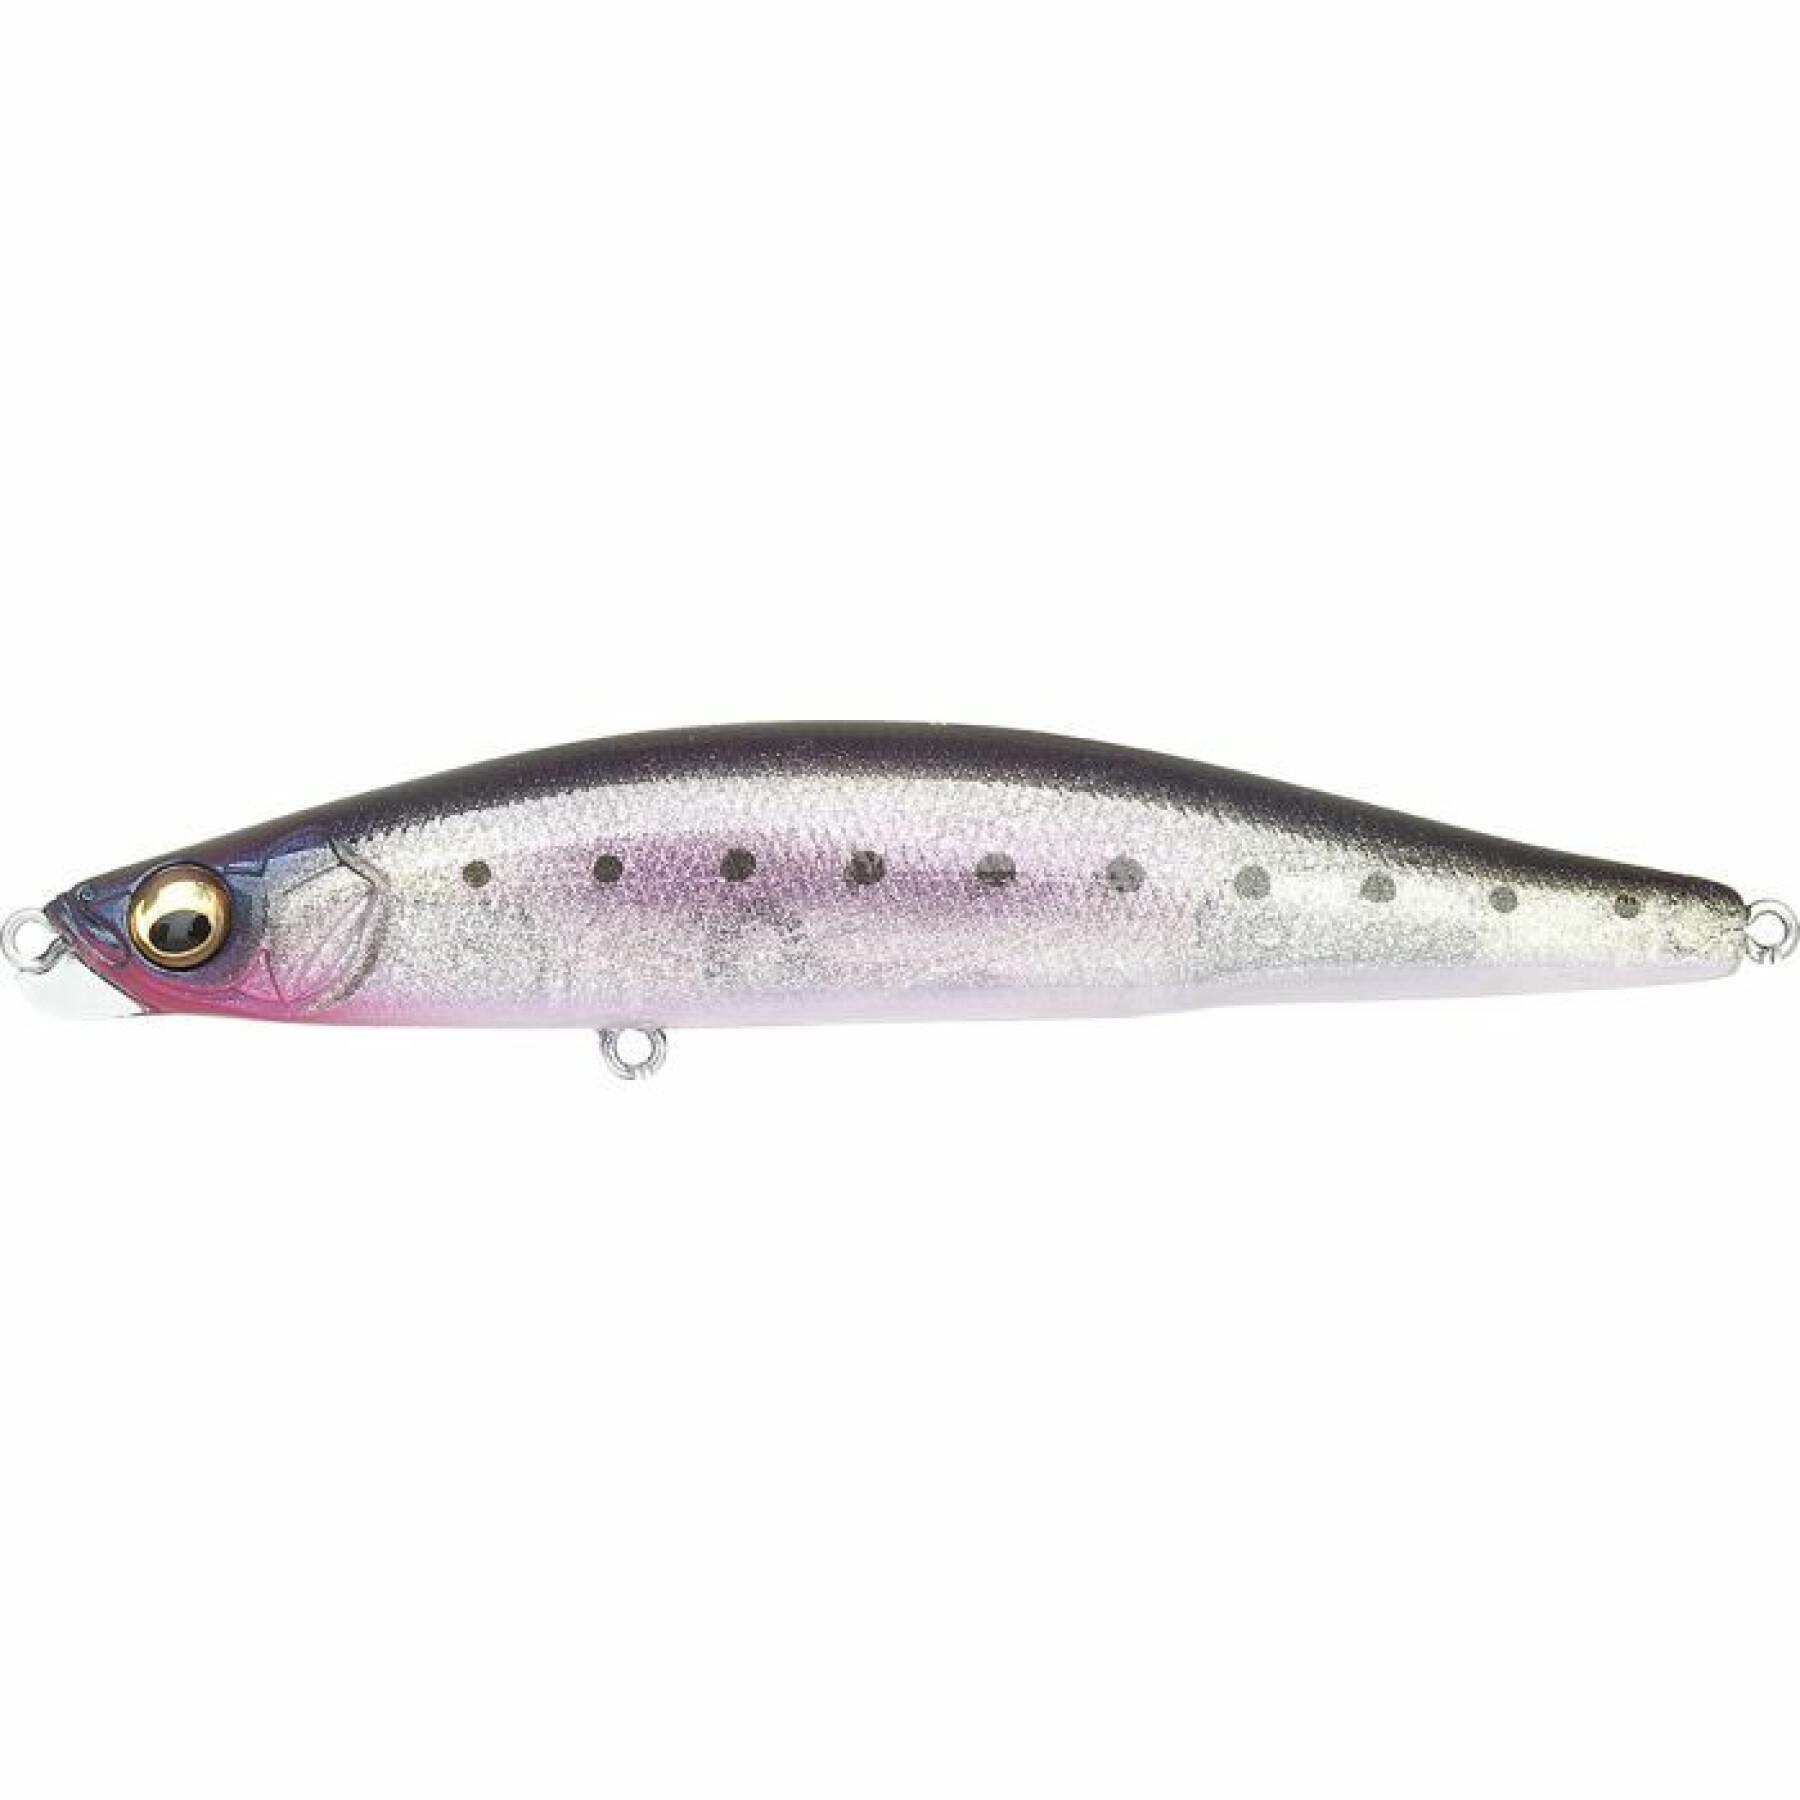 Lure Megabass Genma 110S 29g - Hard lures - Lures - Sea